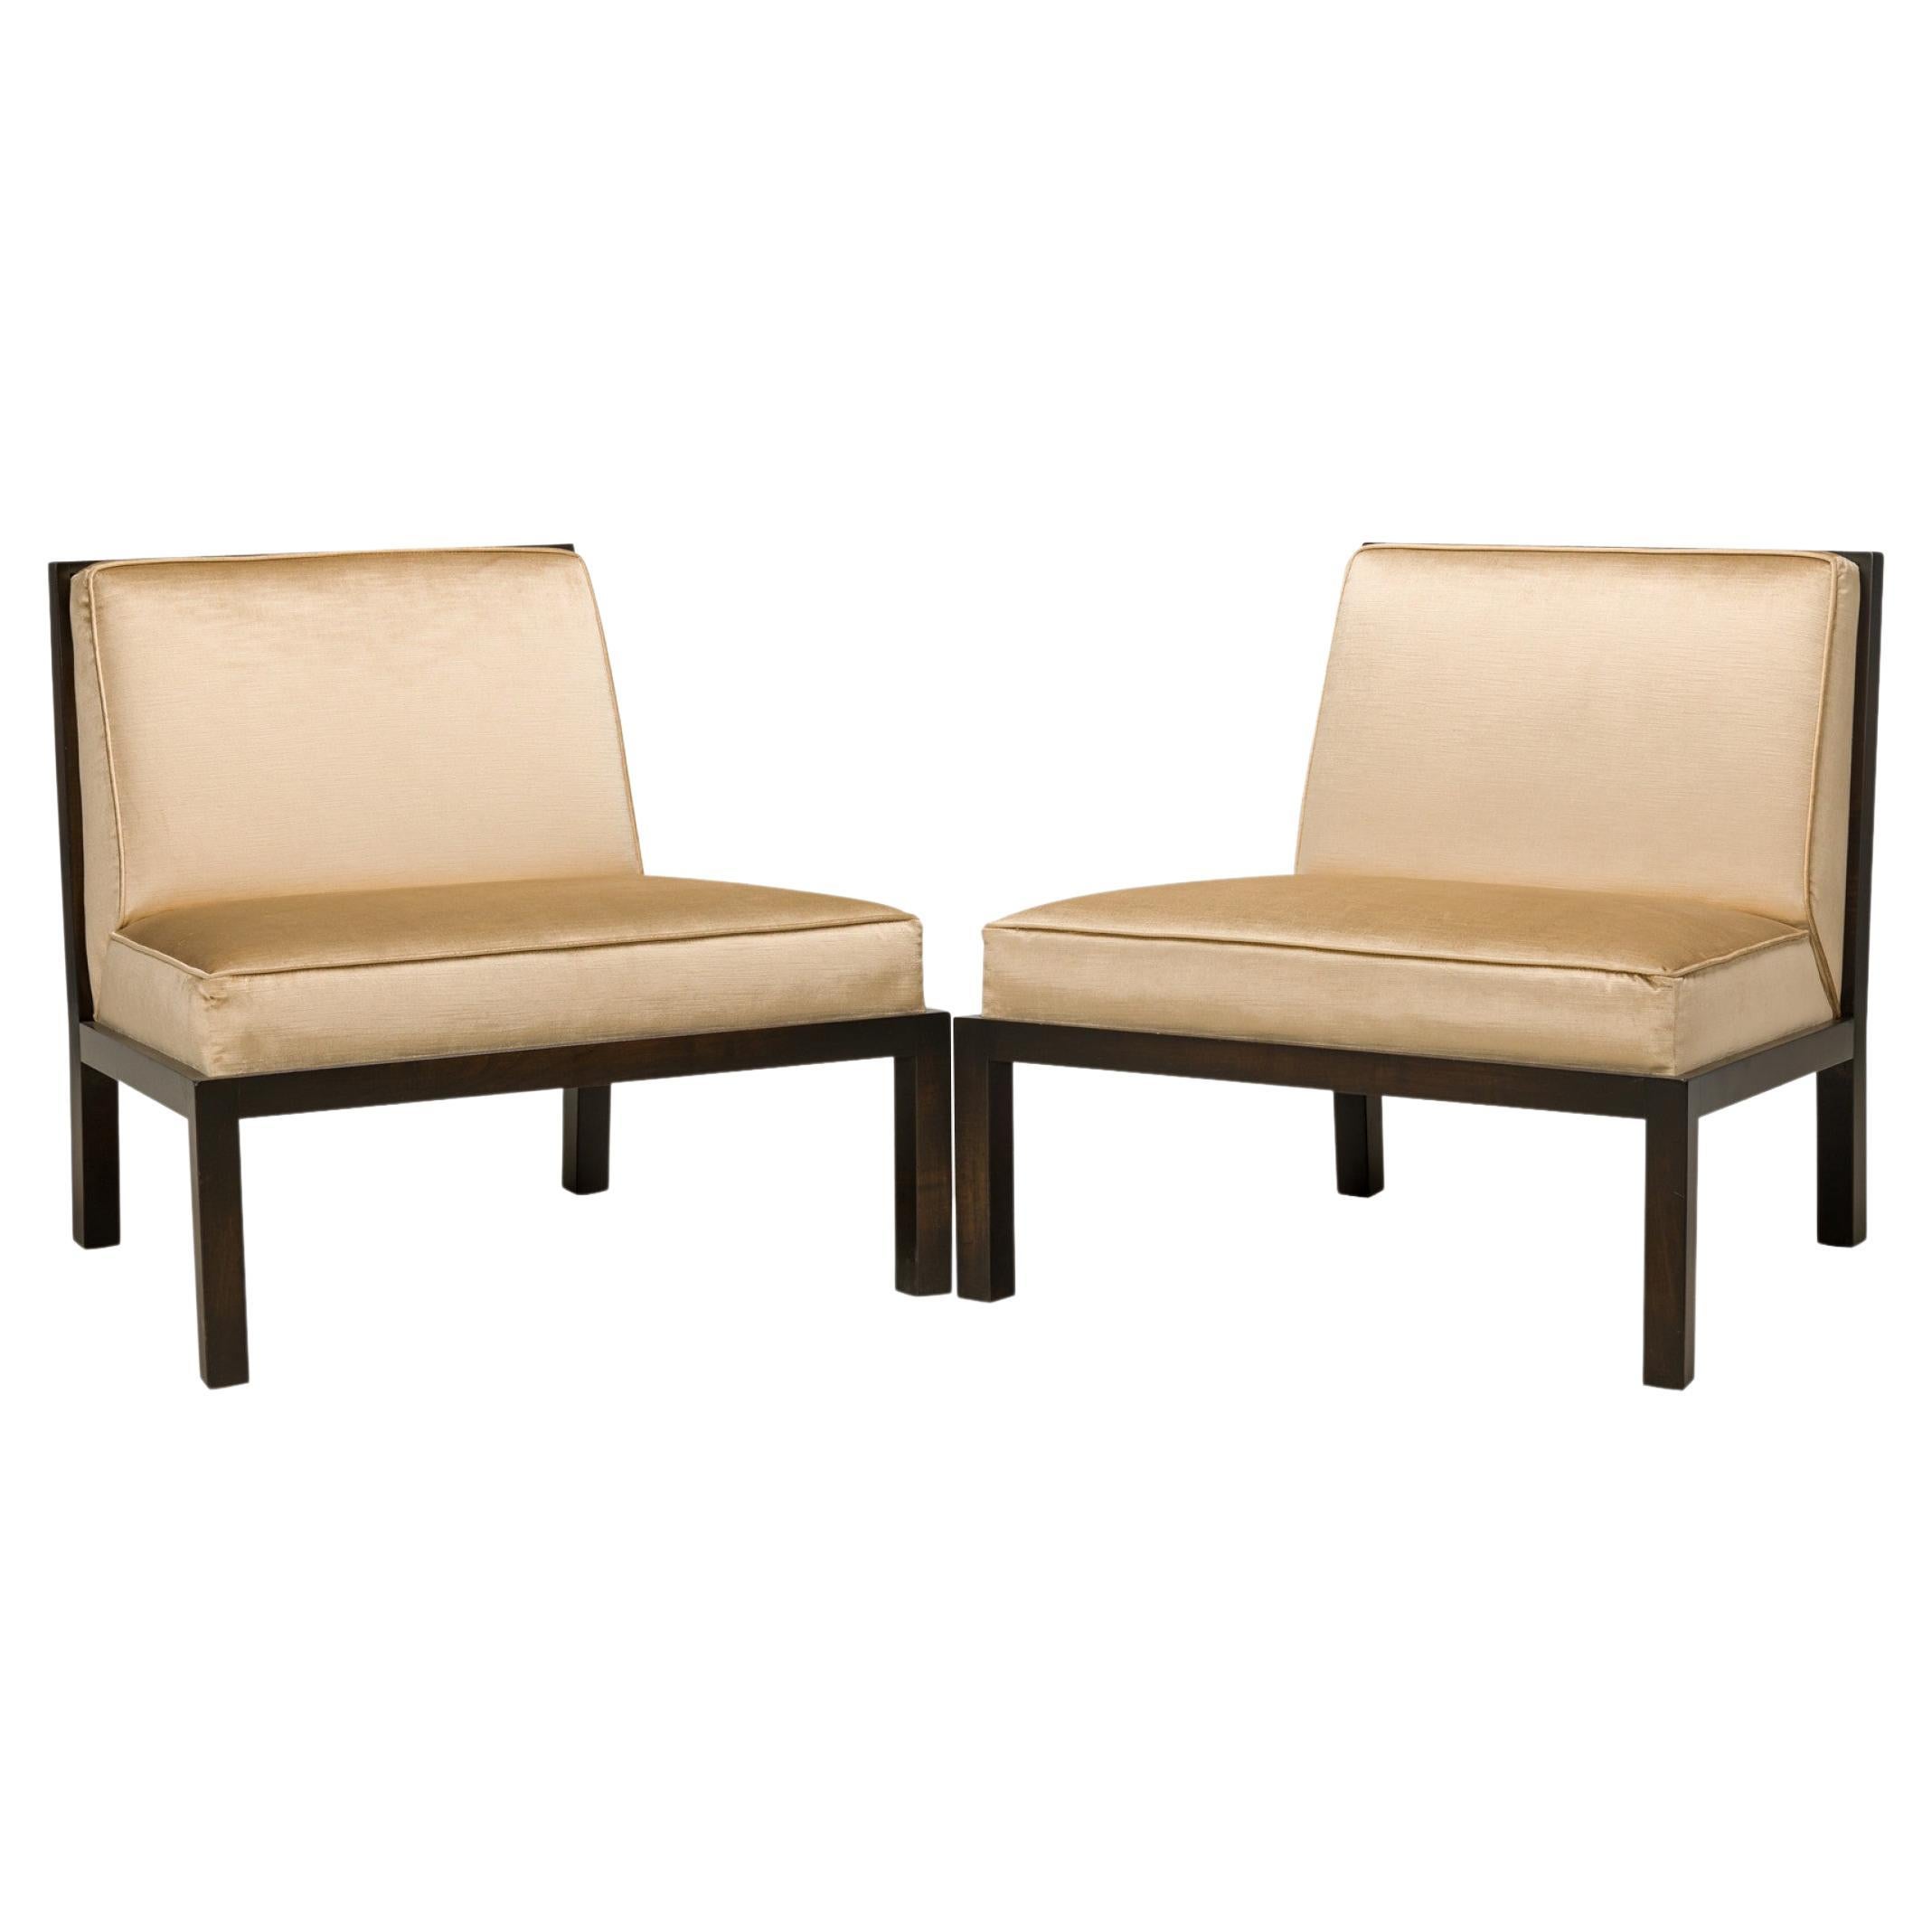 Pair of Michael Taylor for Baker Furniture Co. Champagne Satin Slipper Chairs